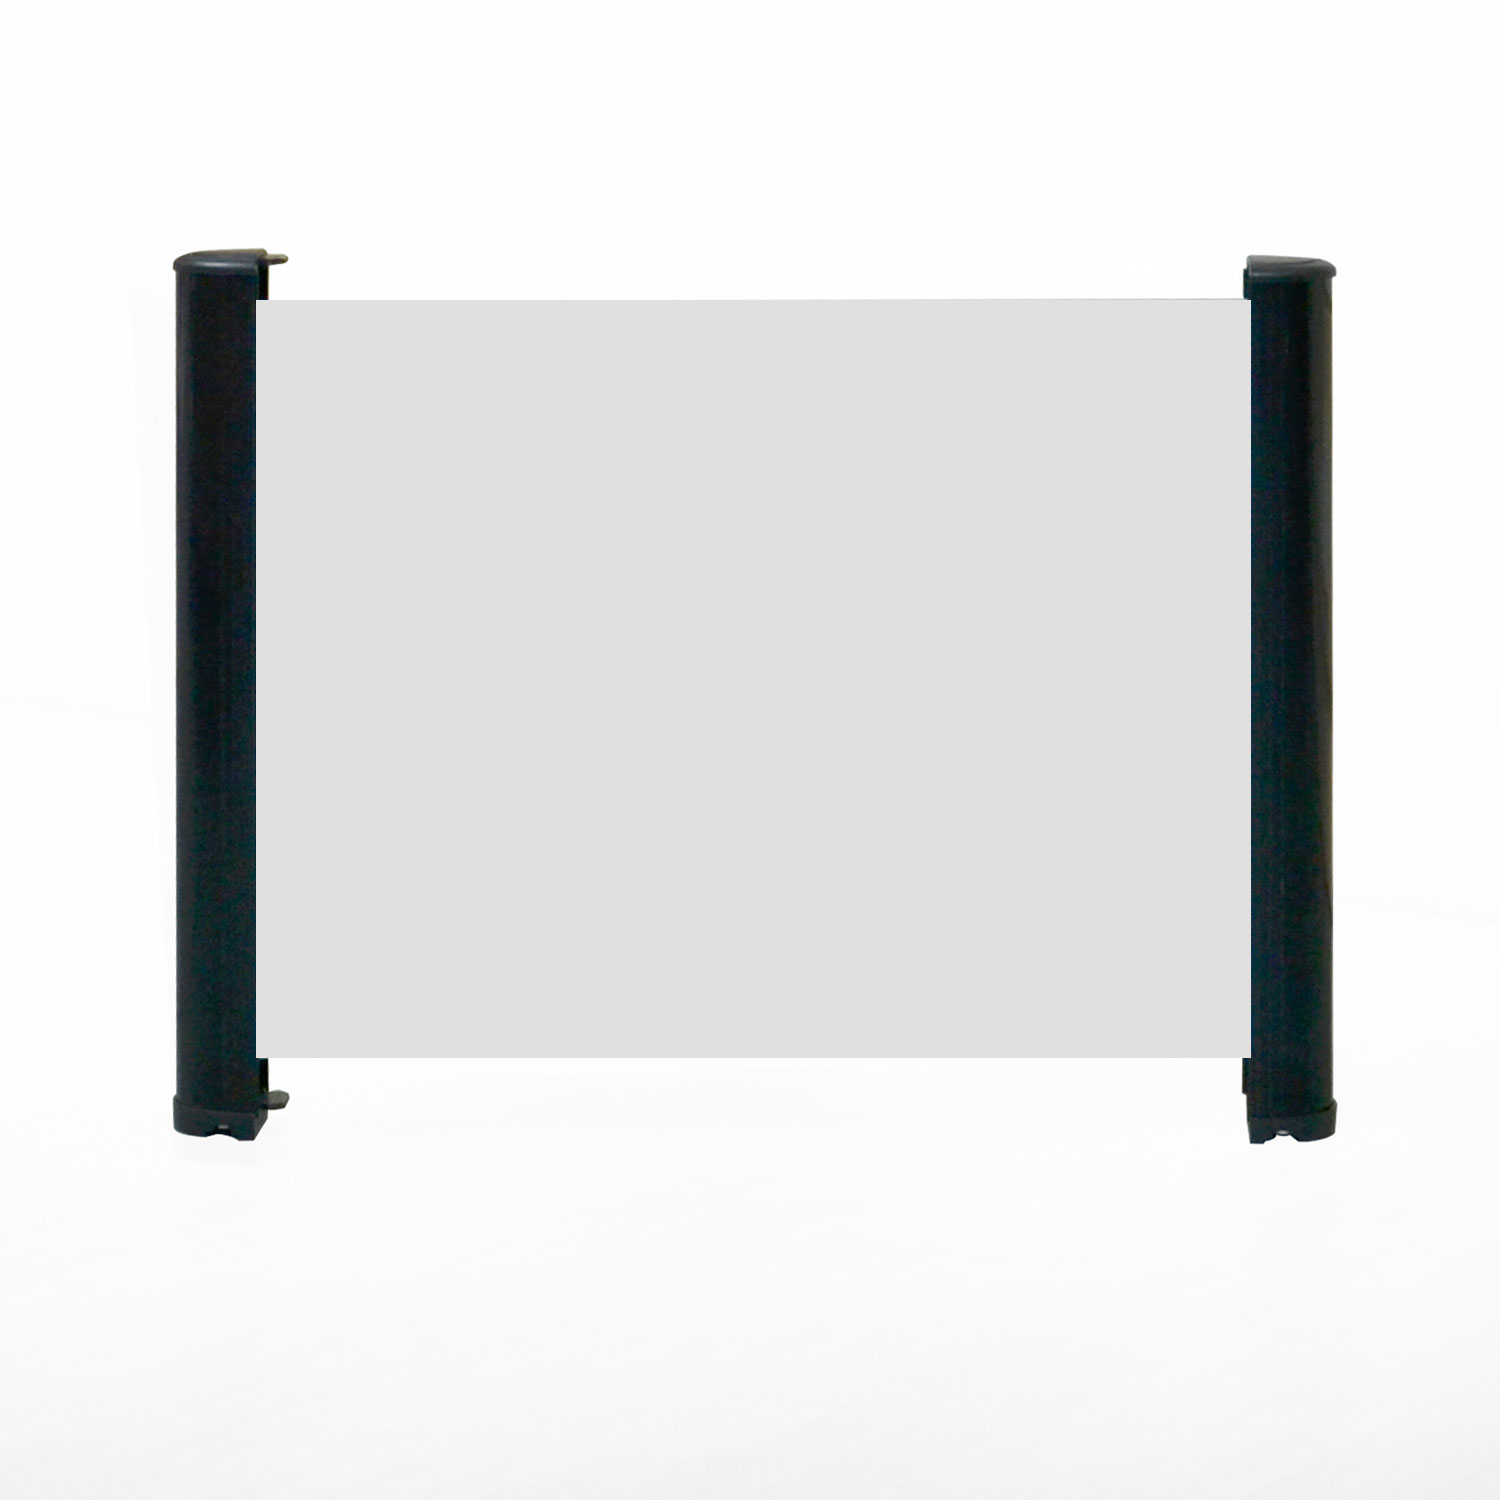 Tabletop Projection Screen WTA